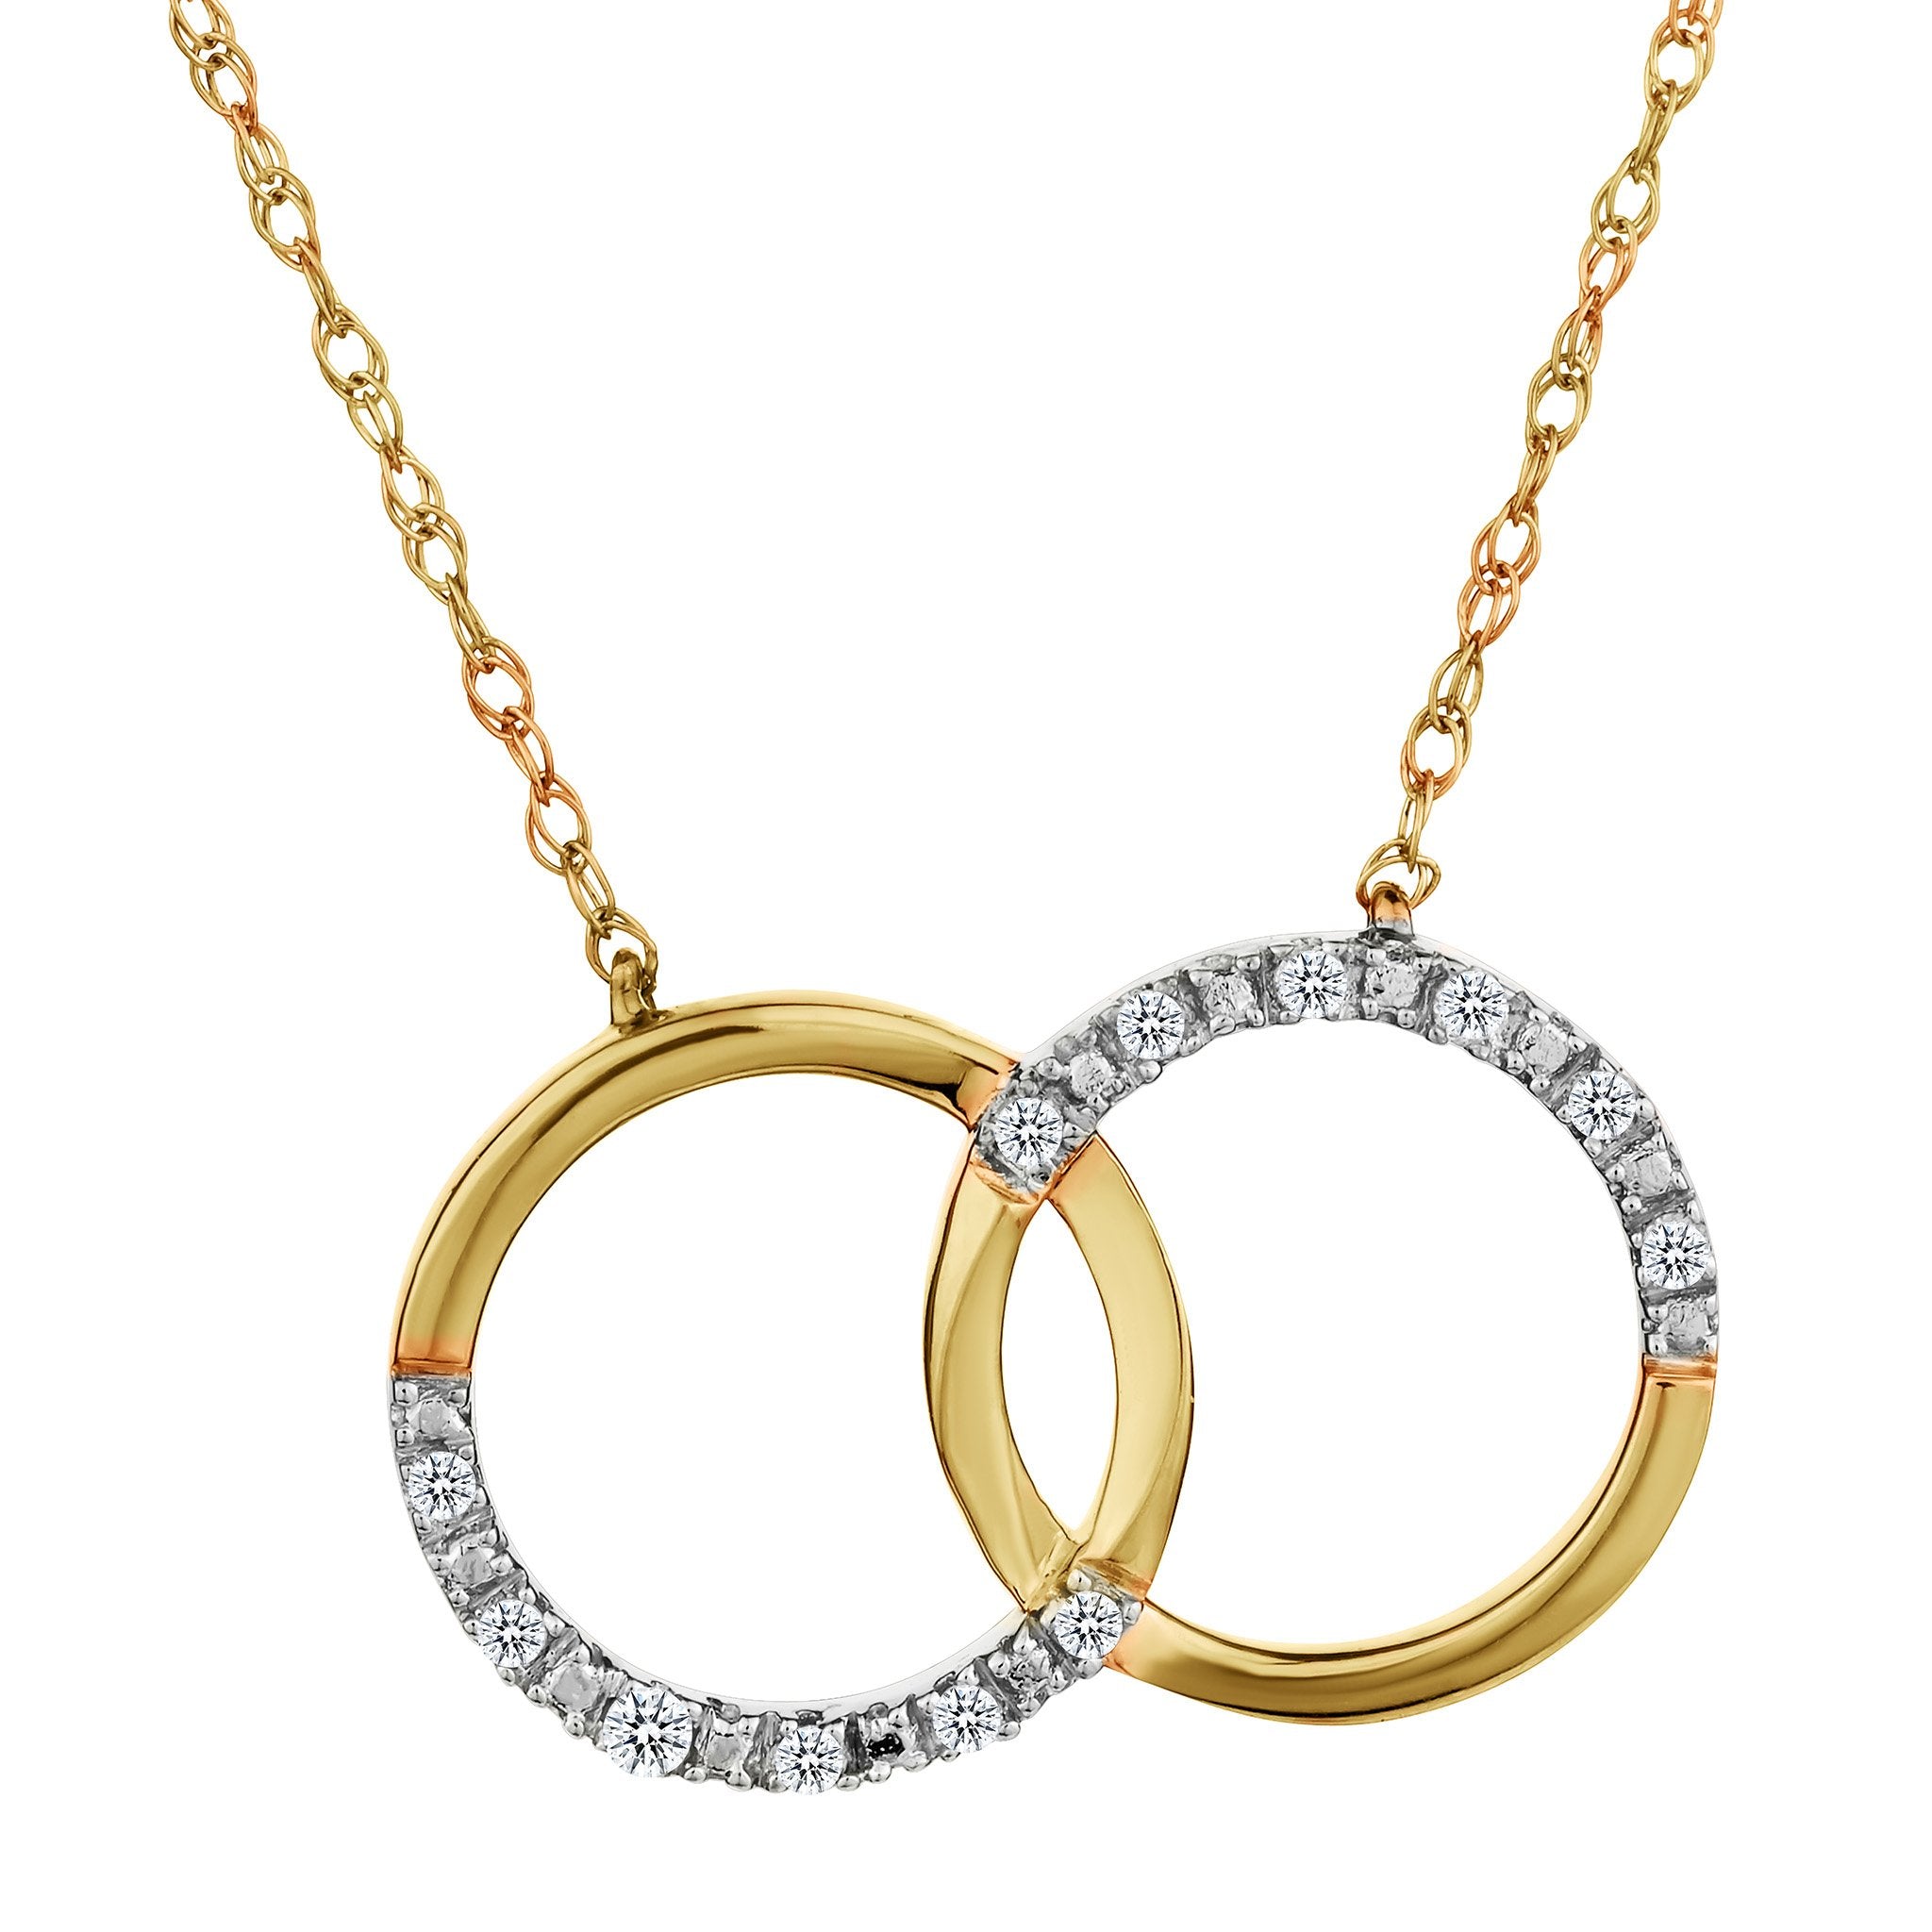 .05 Carat of Diamonds "Rings of Love" Pendant Necklace, 10kt Yellow Gold....................NOW